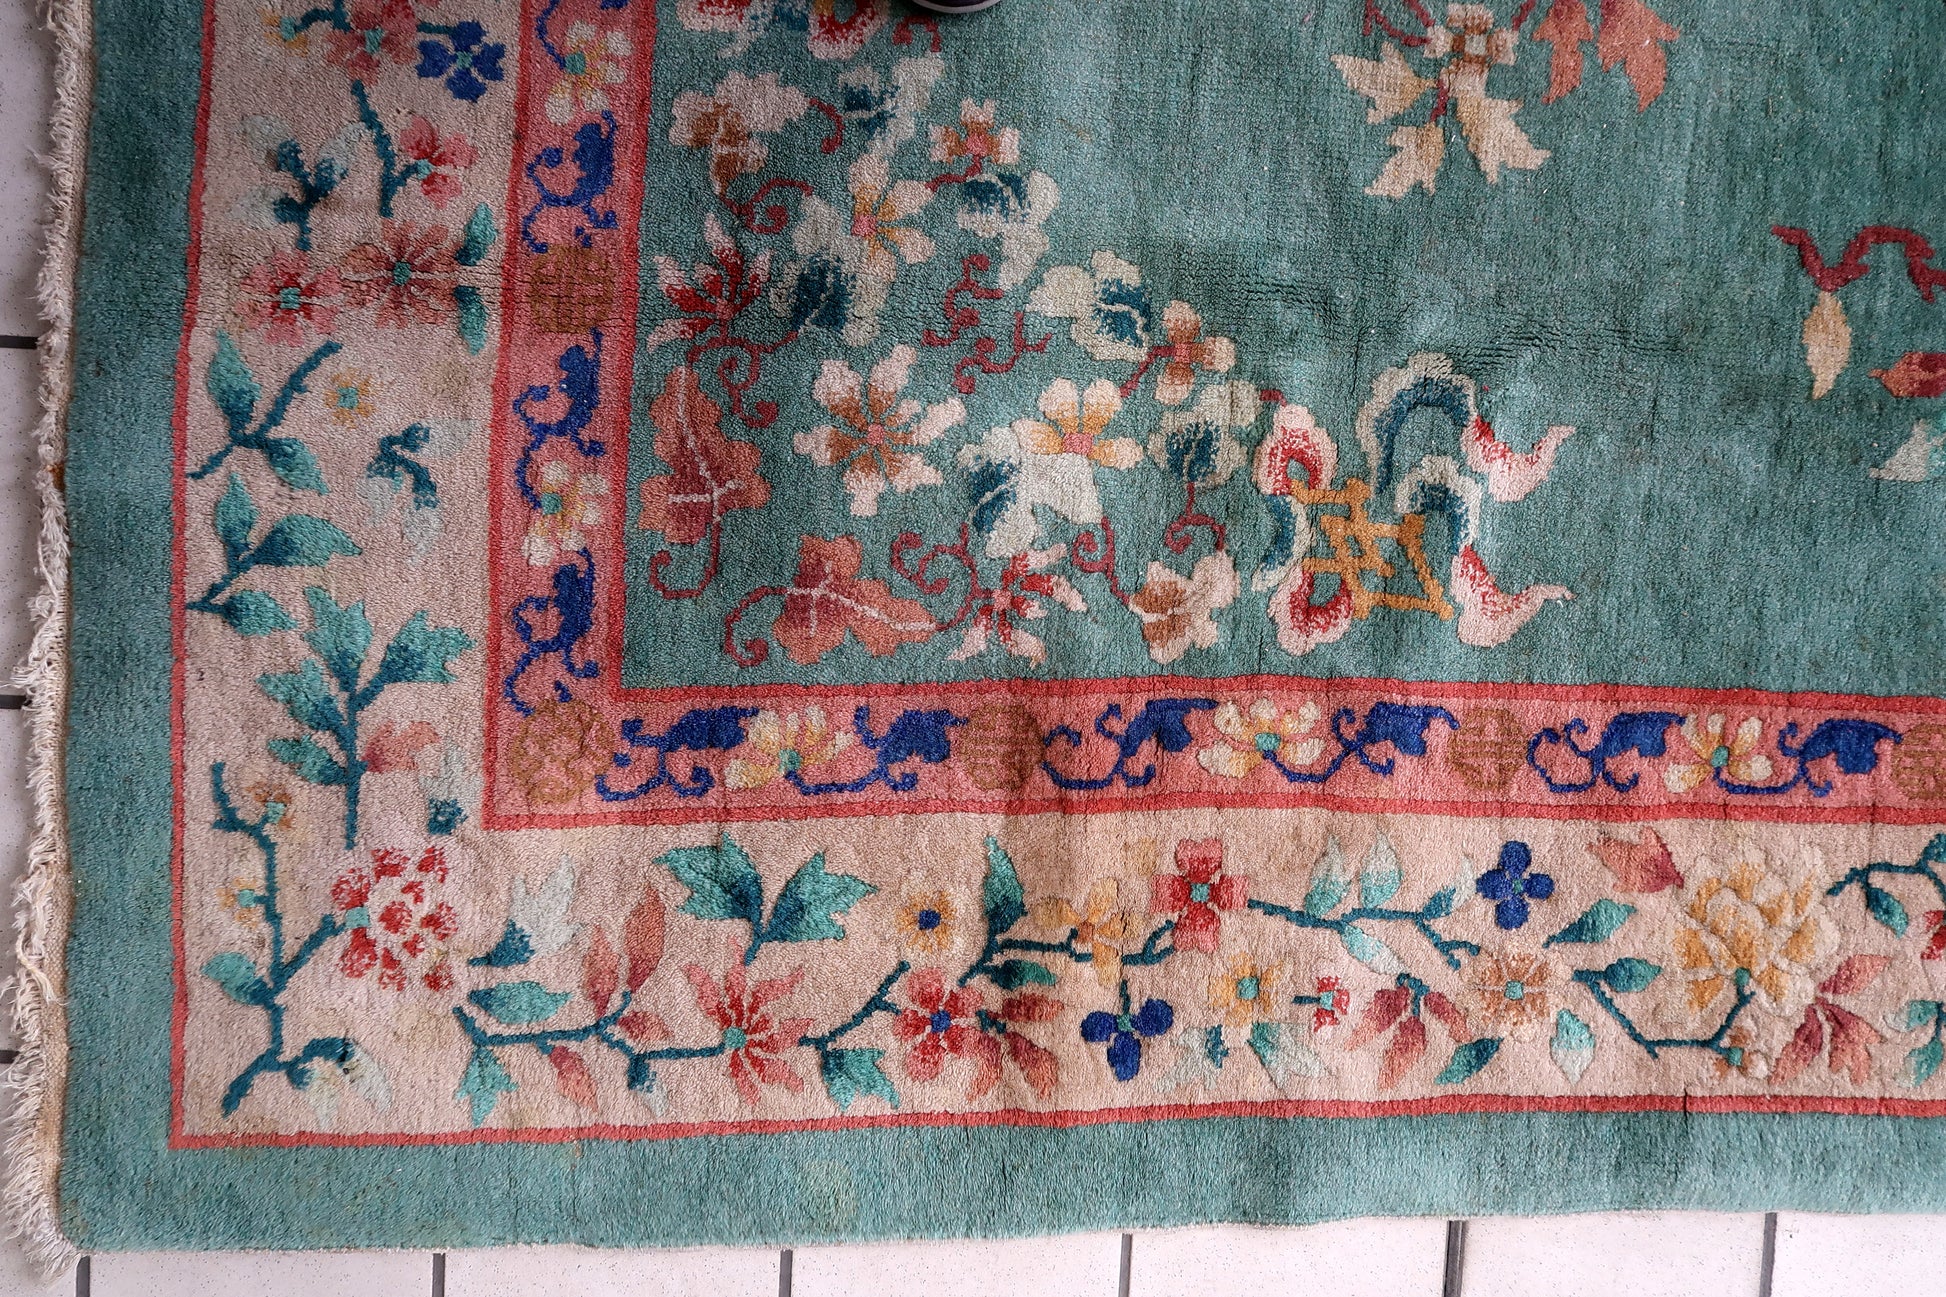 Detailed view of the rug's floral motifs.